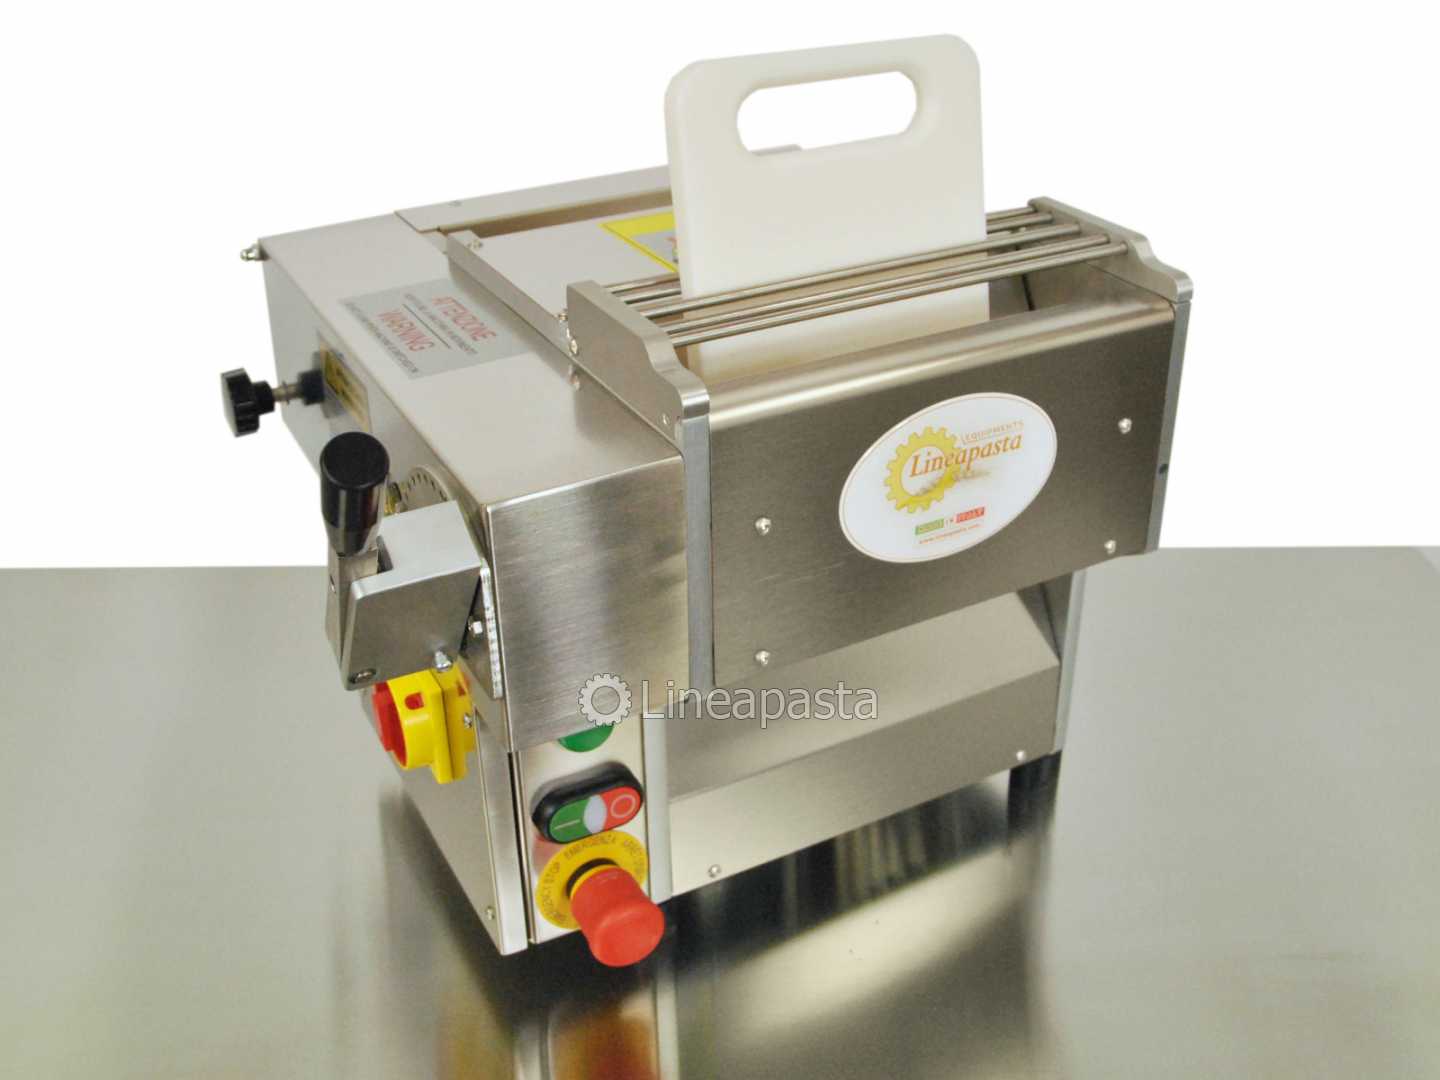 Fresh pasta sheeter nina - rollers width 170 mm - approximate